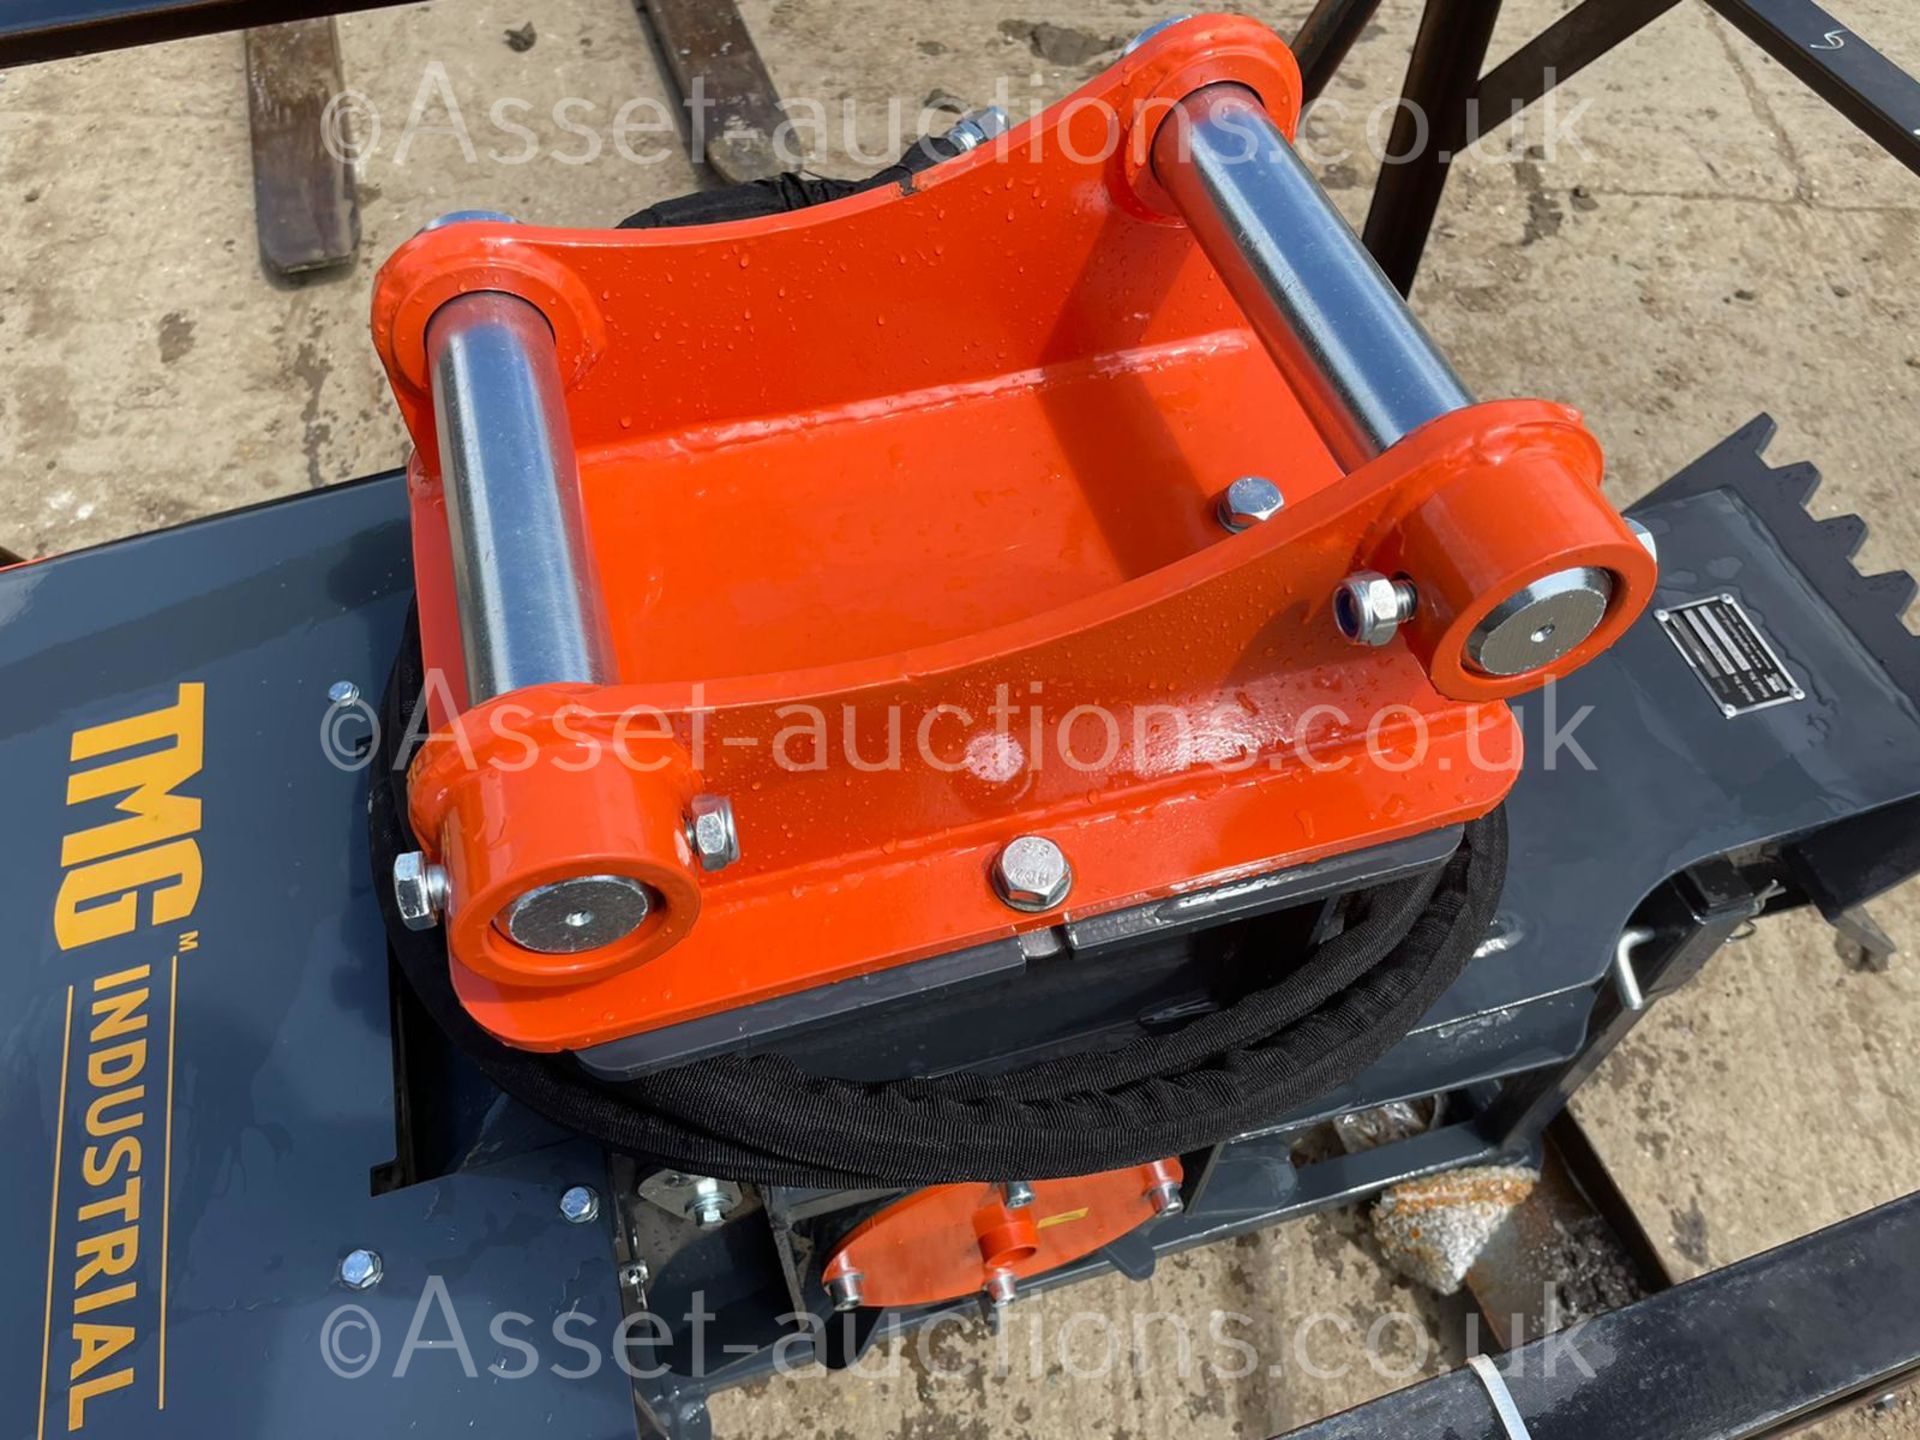 NEW AND UNUSED HEAVY DUTY 18" STUMP GRINDER, HYDRAULIC DRIVEN, 50mm PINS *PLUS VAT* - Image 15 of 16